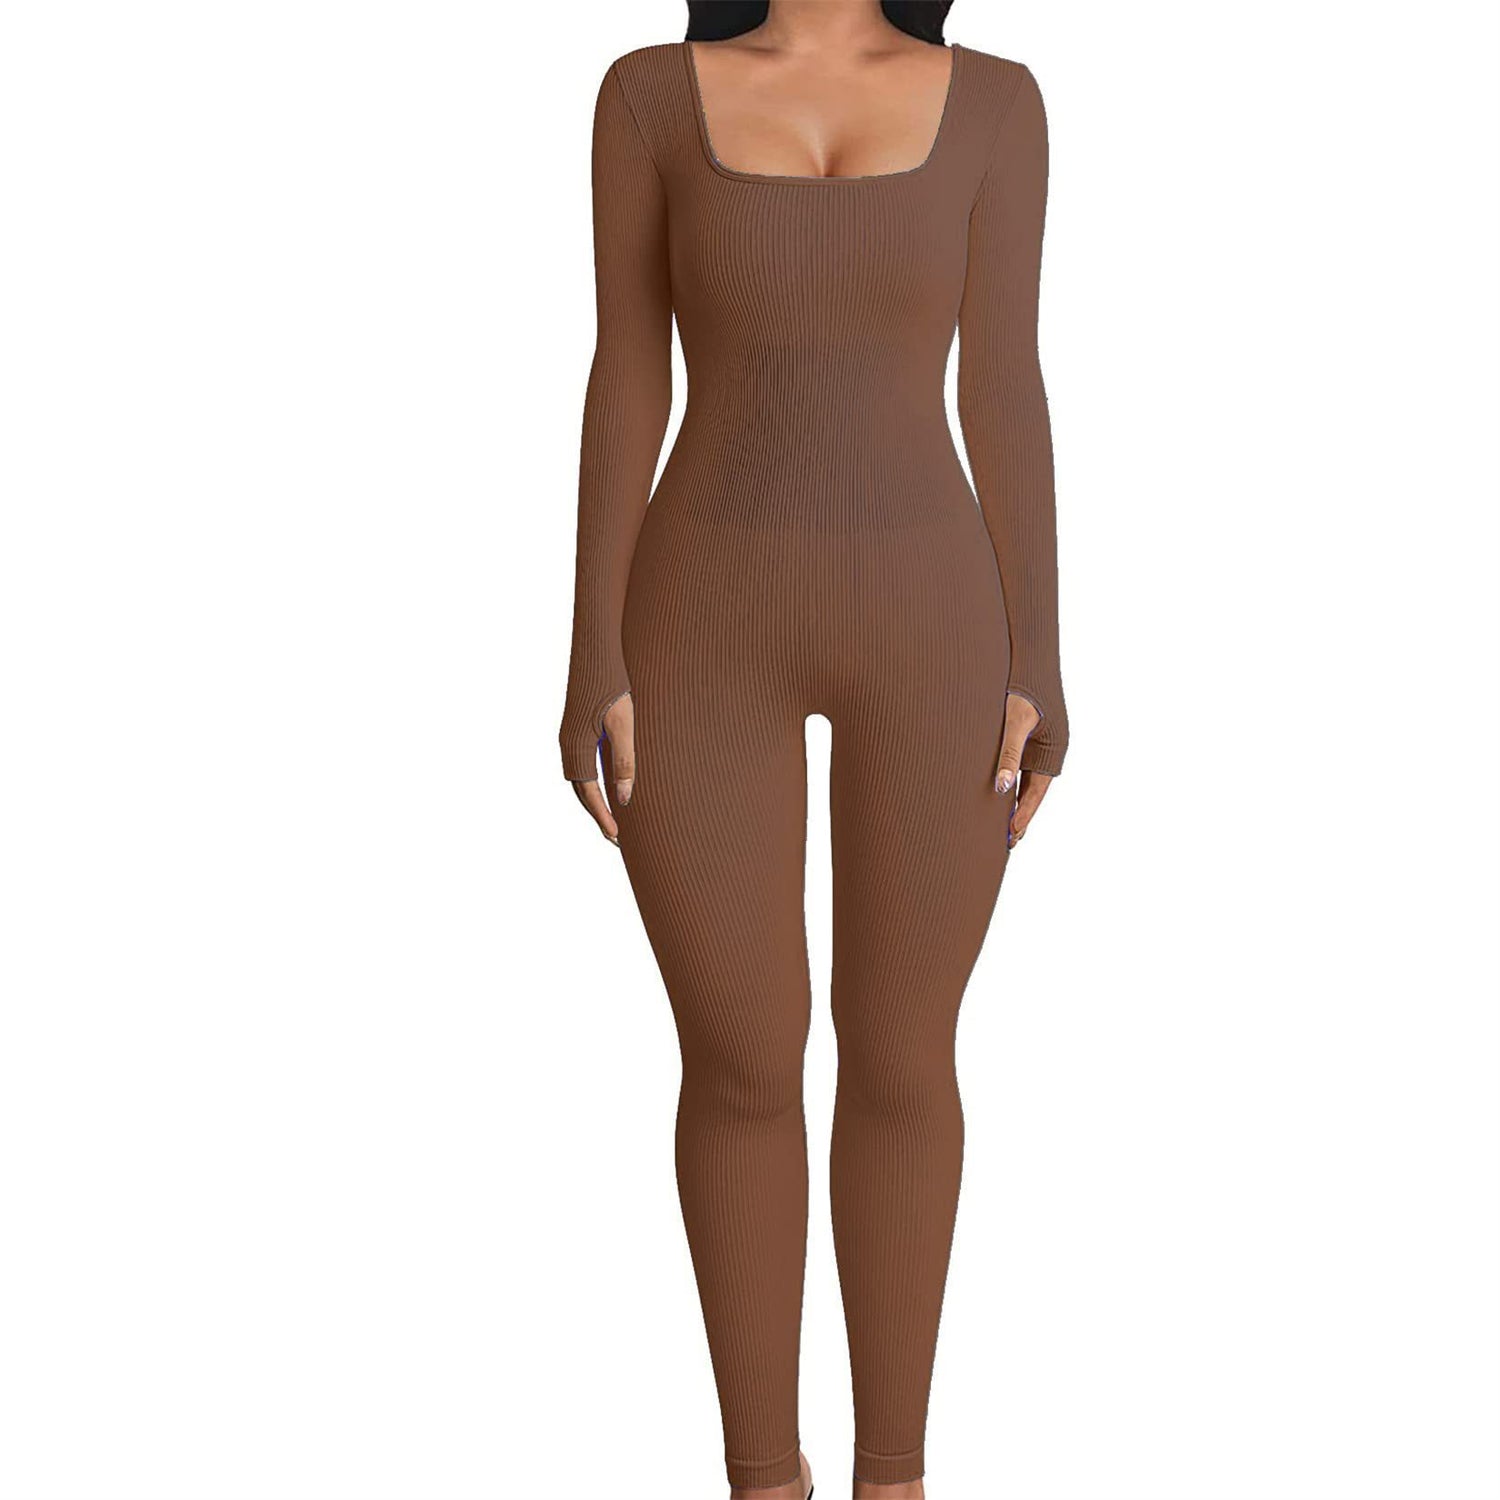 Jumpsuit  | Urban Chic: One-Piece Thread Bodysuit in Dazzling Colors – Sizes S to 3XL | 2XL |  Brown| thecurvestory.myshopify.com